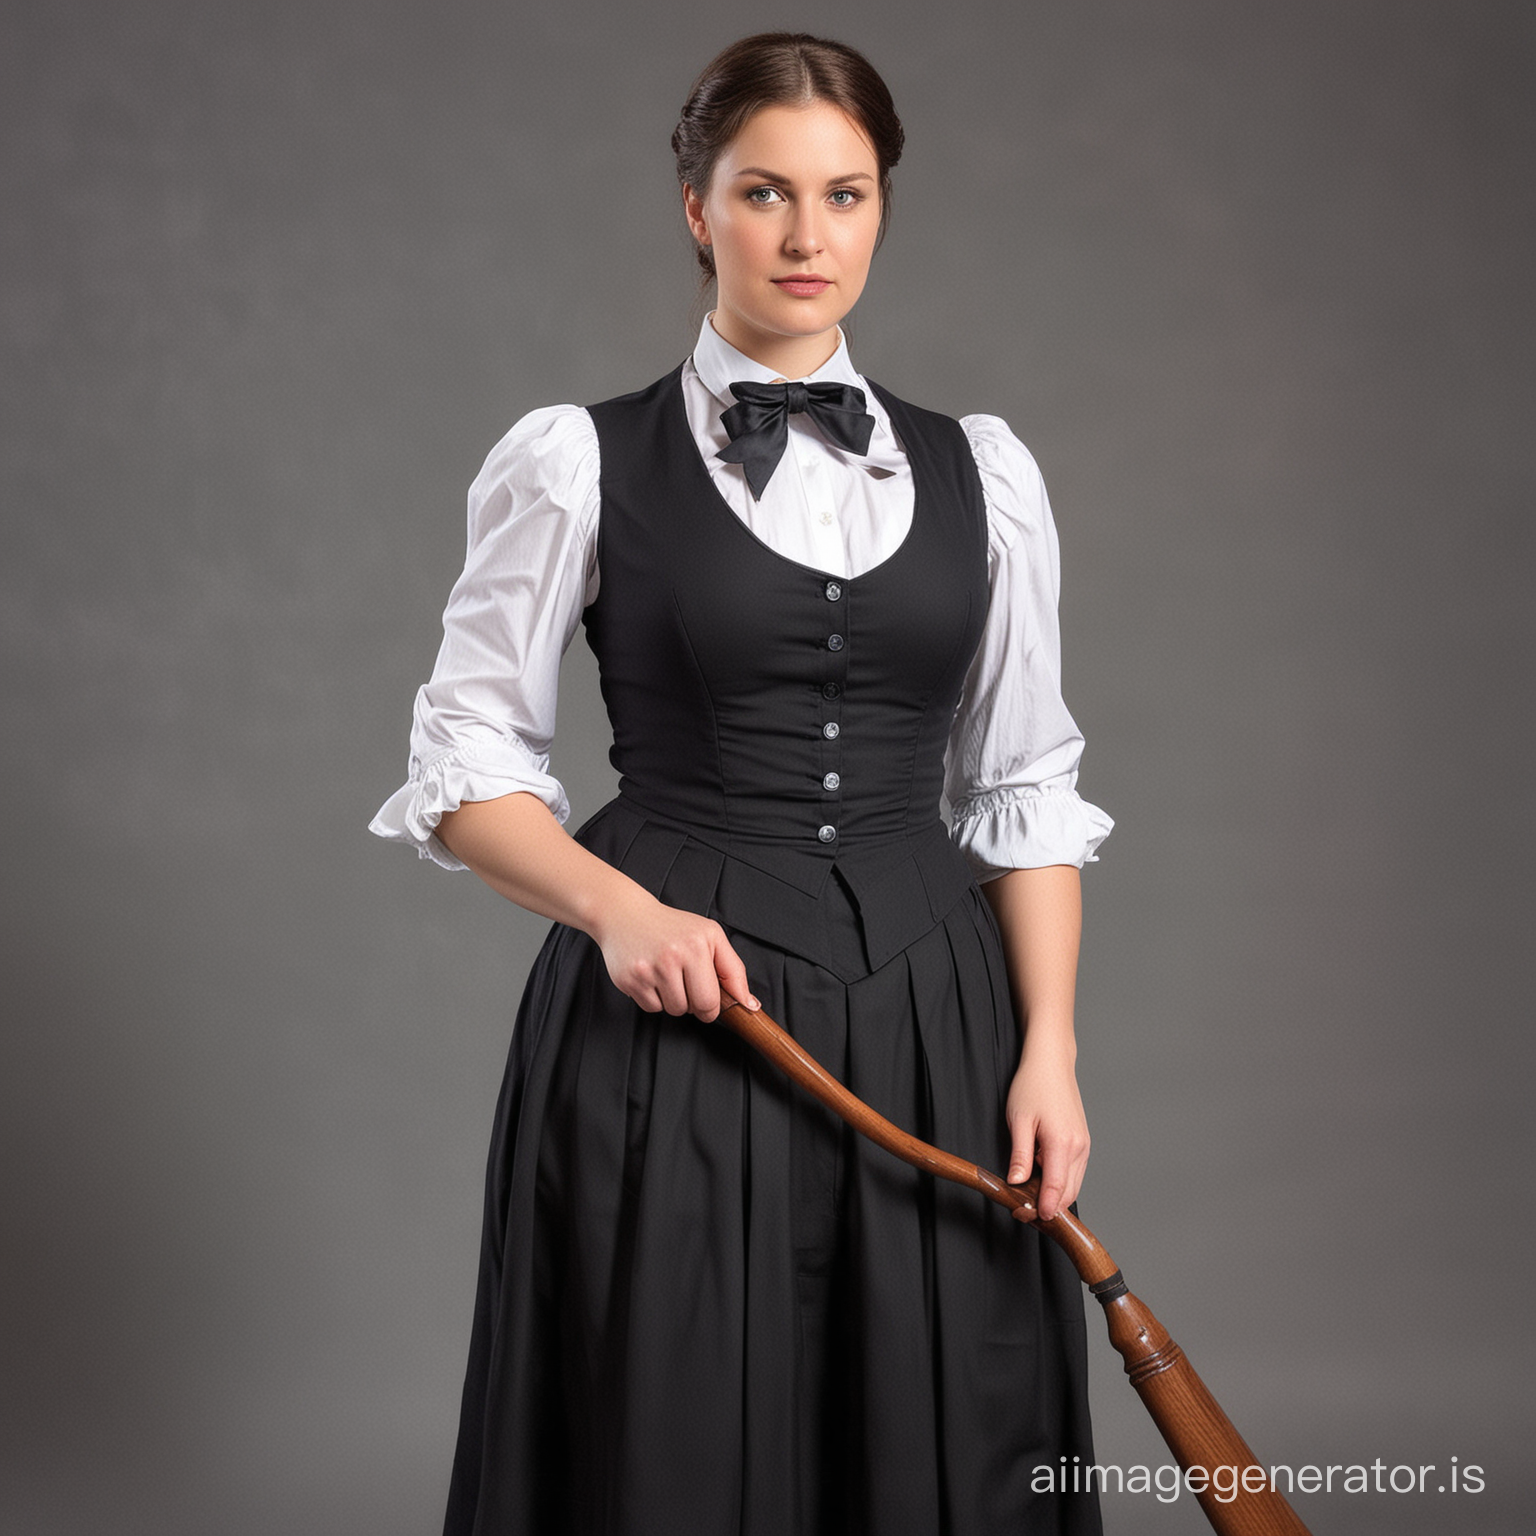 really strict german governess, curvy figure, strong upper arms, vey wide hips, long tight skirt, stern face, looking at you, treatening with a spanking paddle in right hand, full size